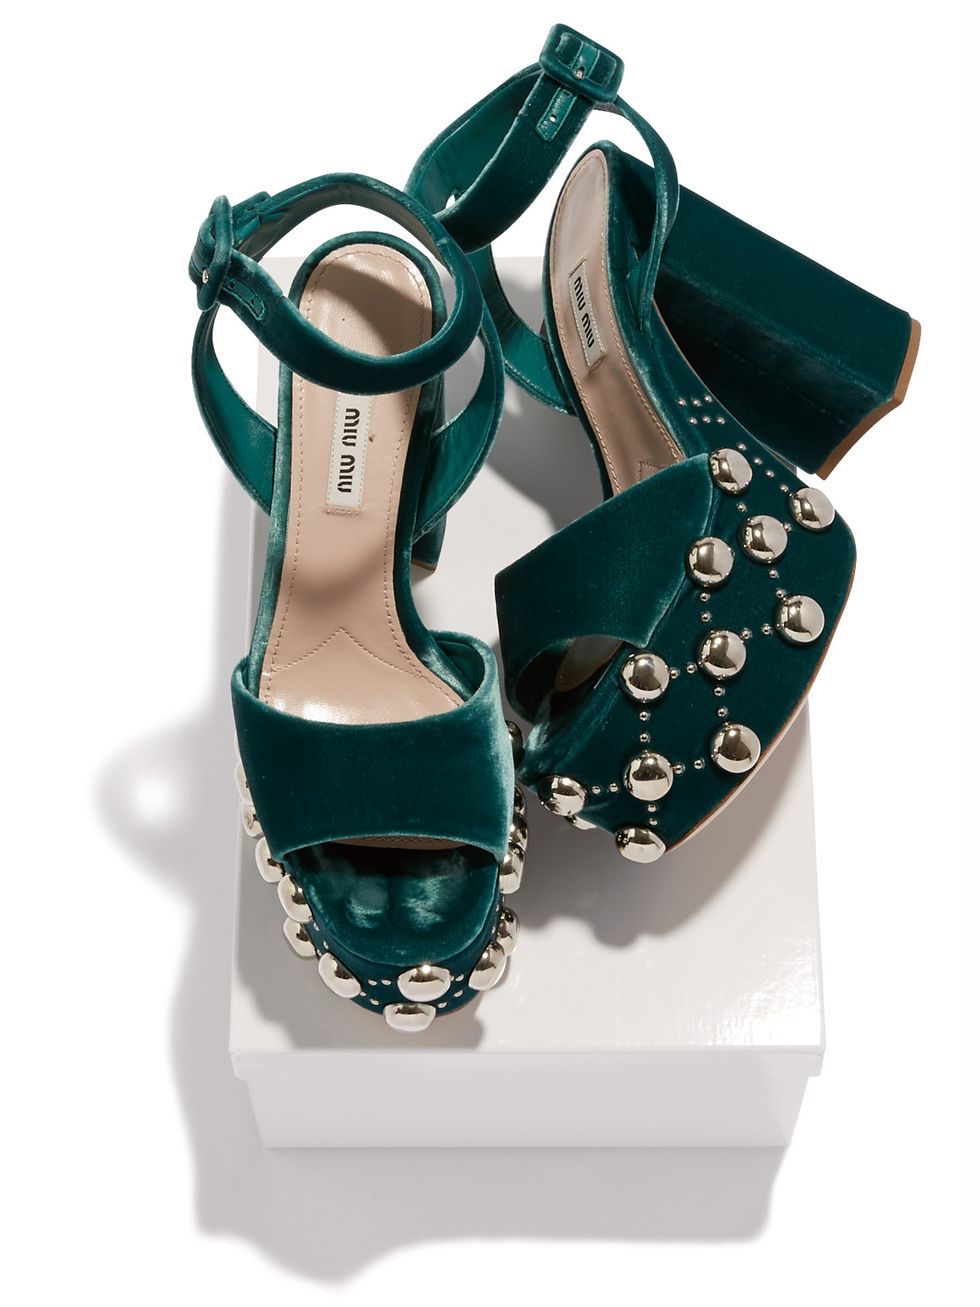 Product, Sandal, Teal, Fashion accessory, Strap, Aqua, Turquoise, High heels, Beige, Still life photography, 